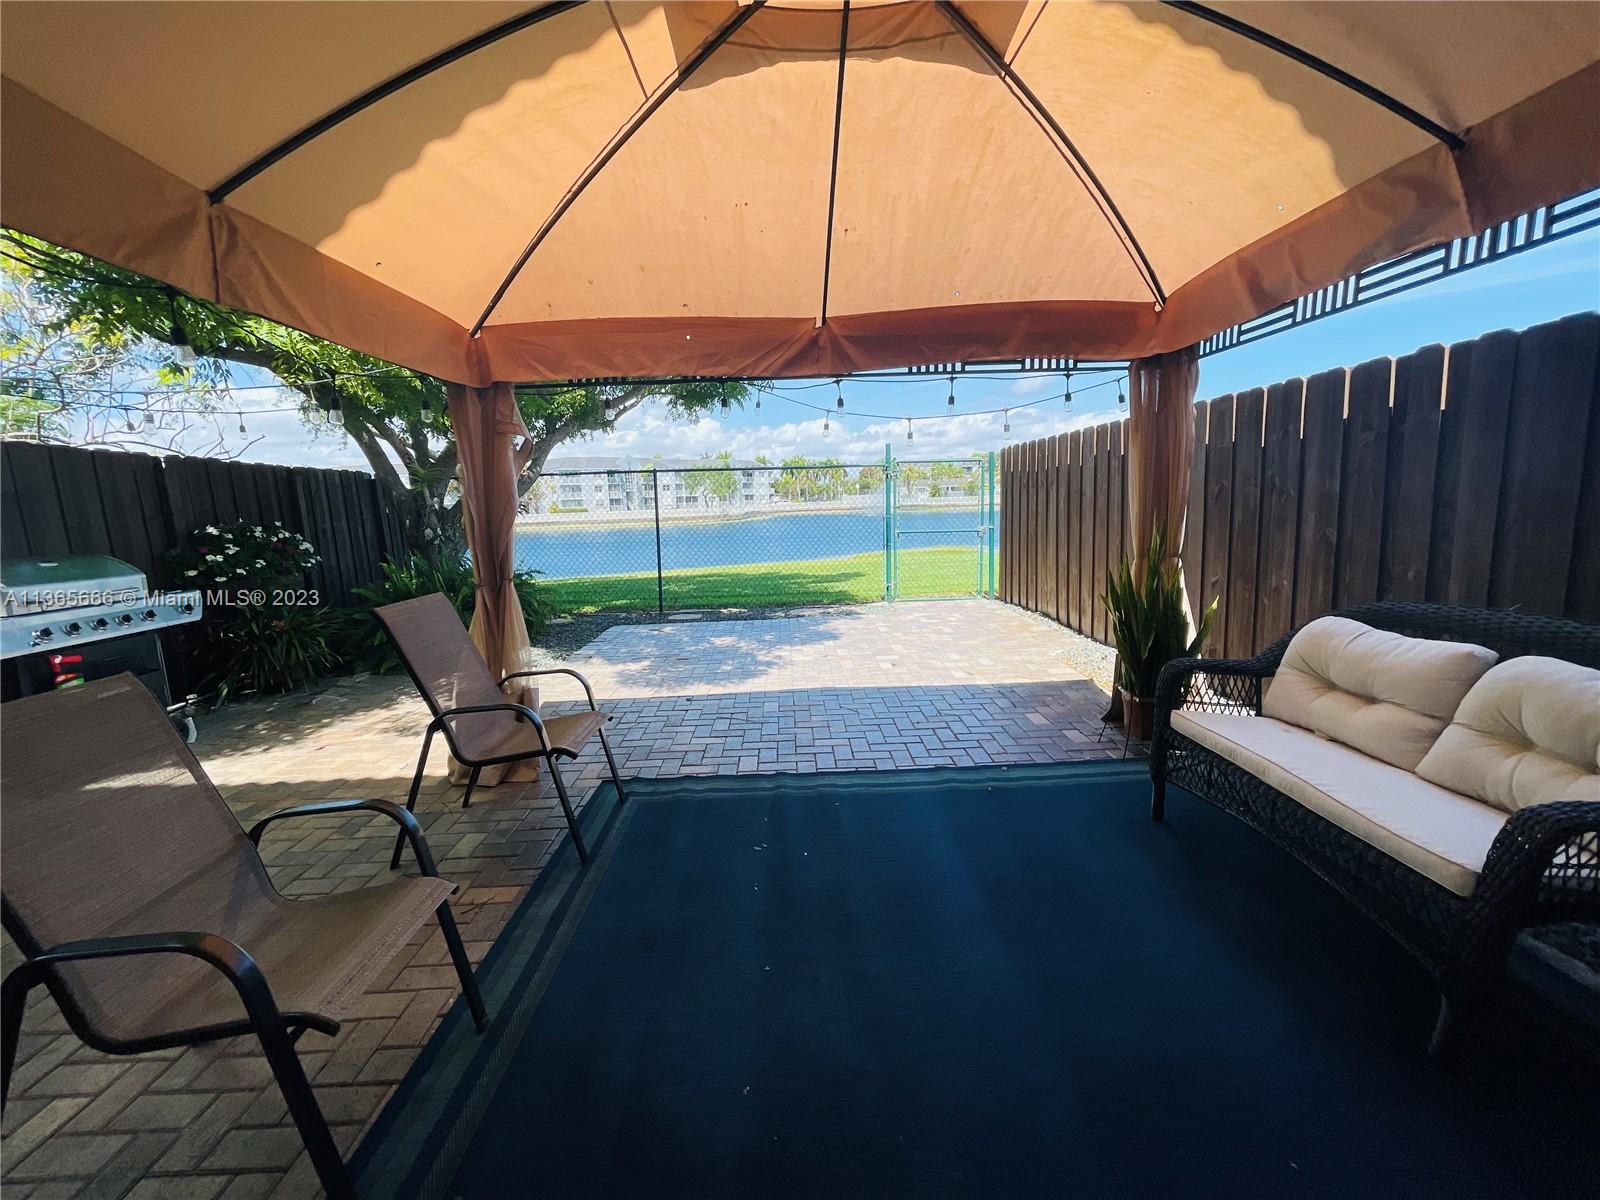 a view of a patio with a table and chairs under an umbrella